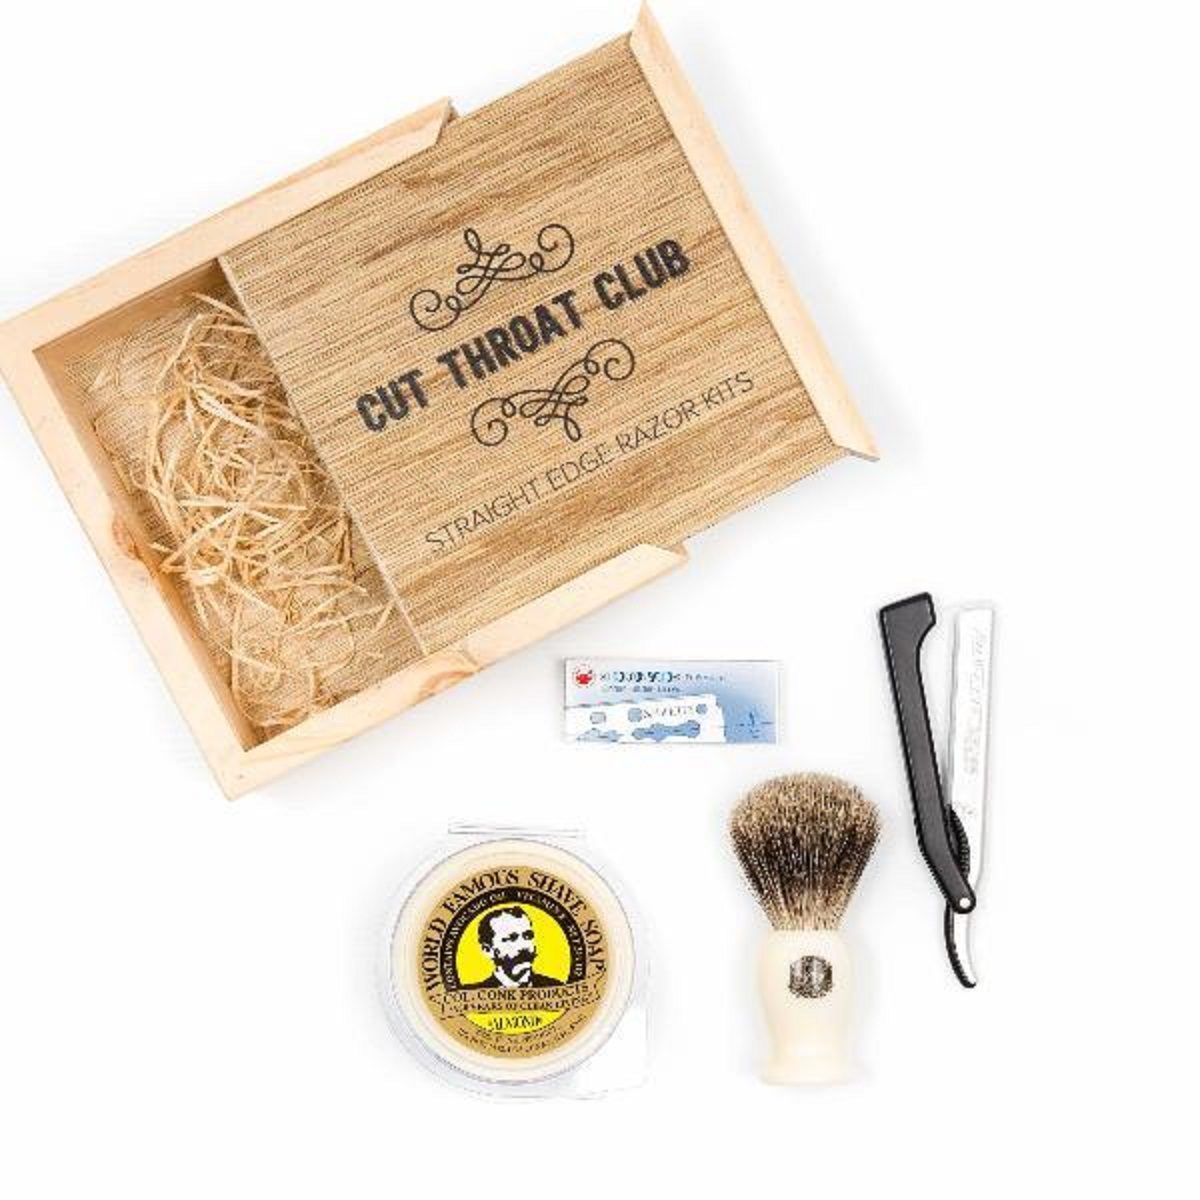 Cut Throat Club may not be a shaving subscription service, but it is one of the leading grooming brands for straight razors in Australia.